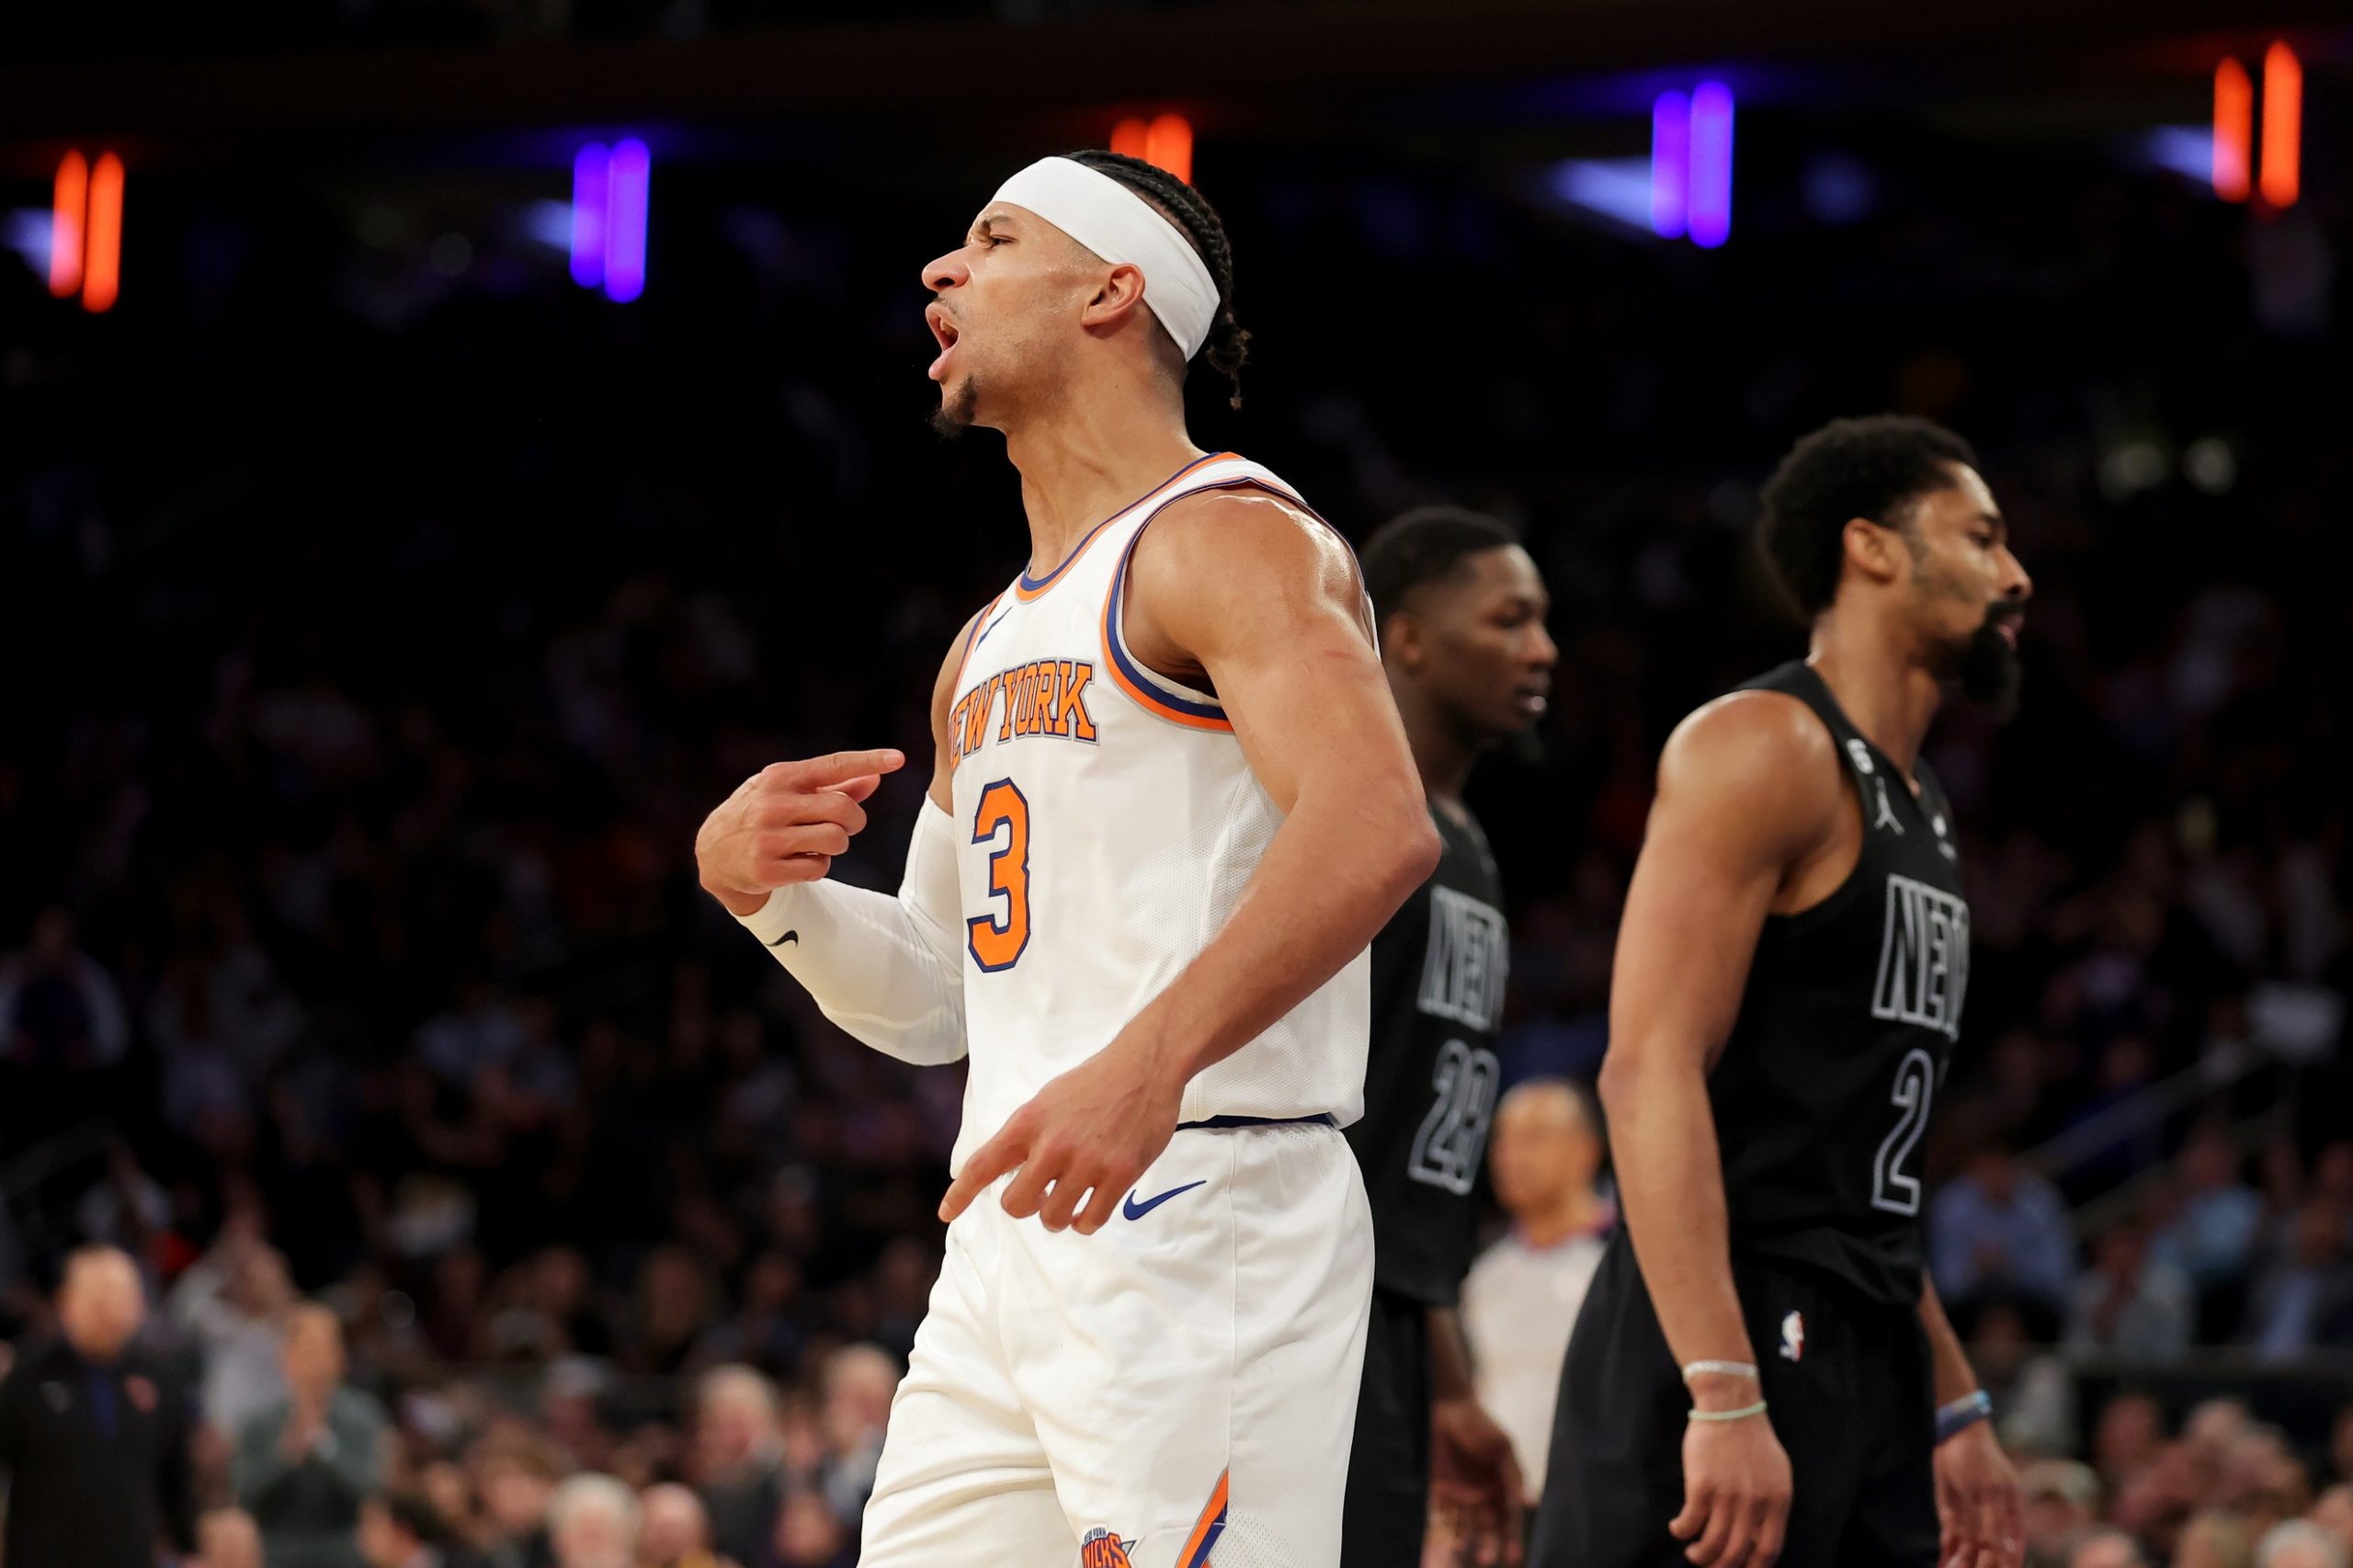 New York Knicks guard Josh Hart (3) reacts after a basket against the Brooklyn Nets during the fourth quarter at Madison Square Garden. Mandatory Credit: Brad Penner-USA TODAY Sports